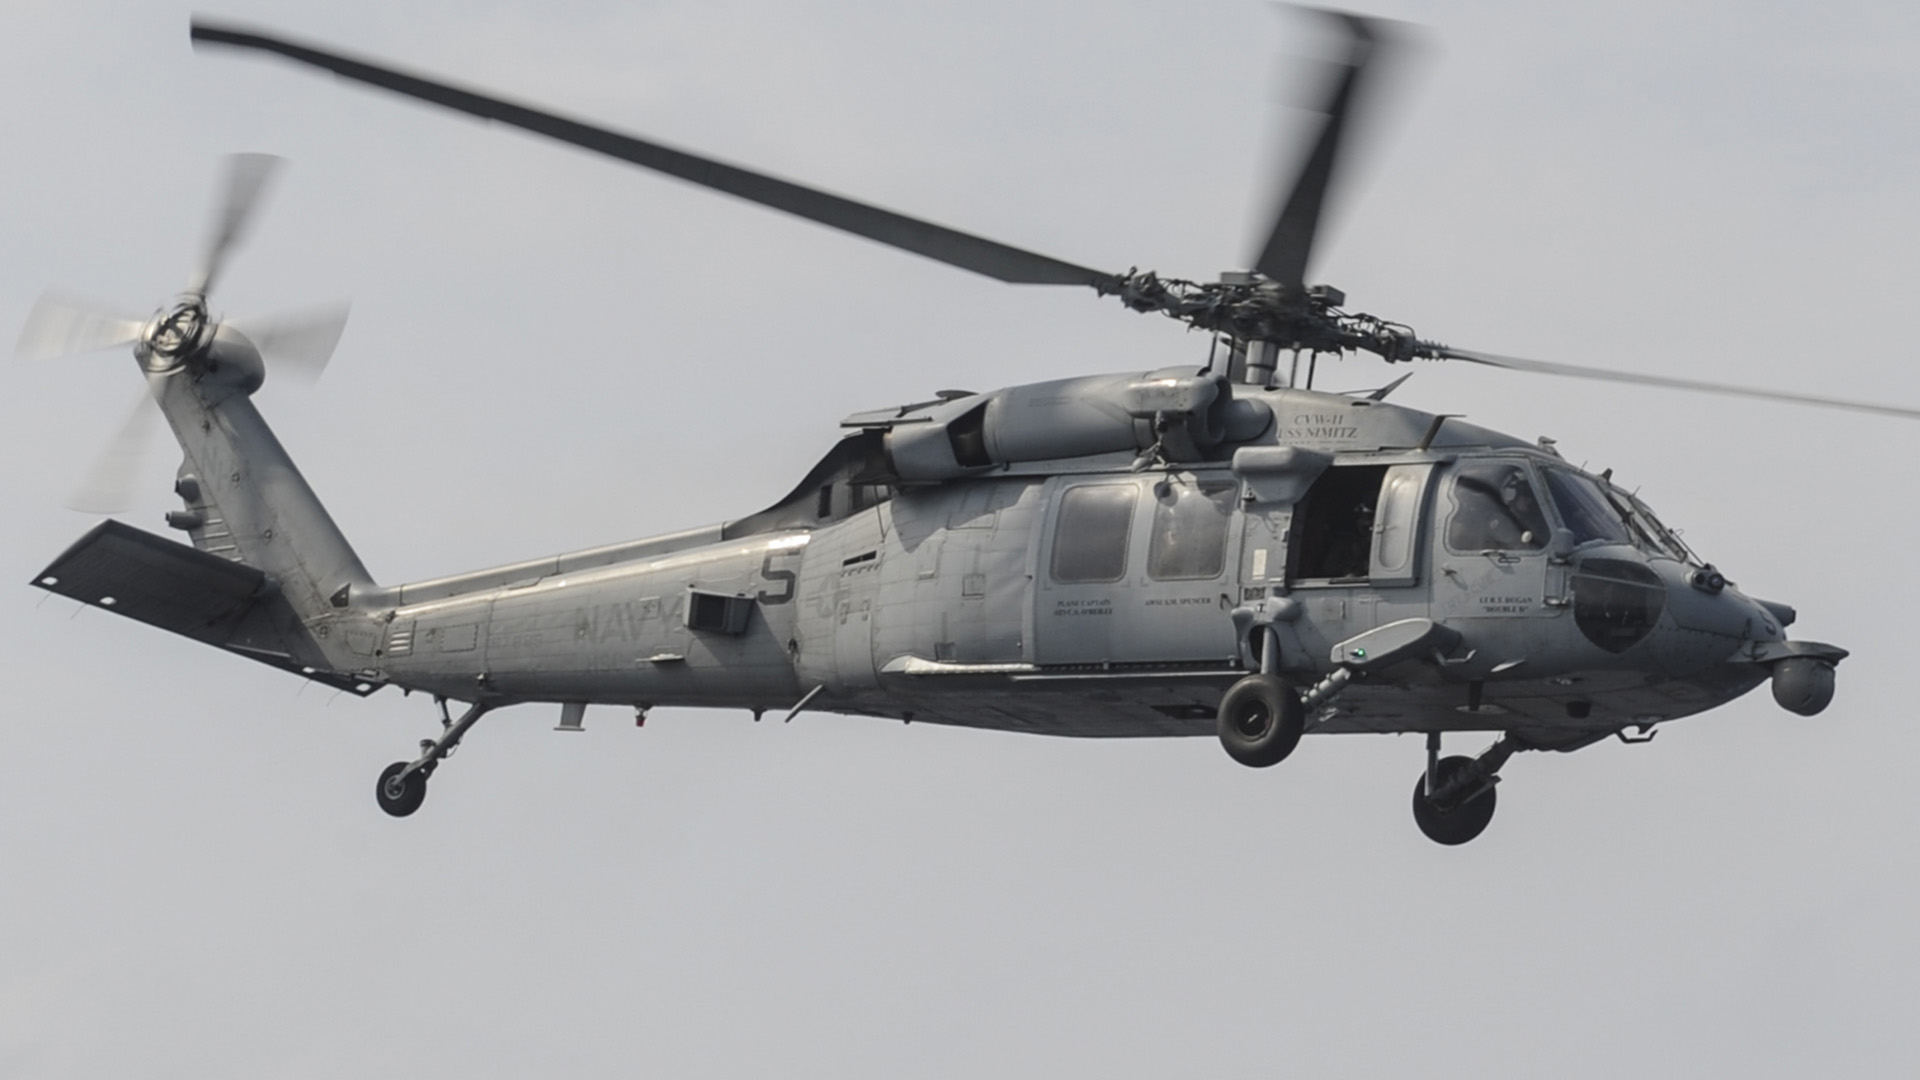 Navy helicopter crash marks the 5th military aviation mishap in less than 2 weeks